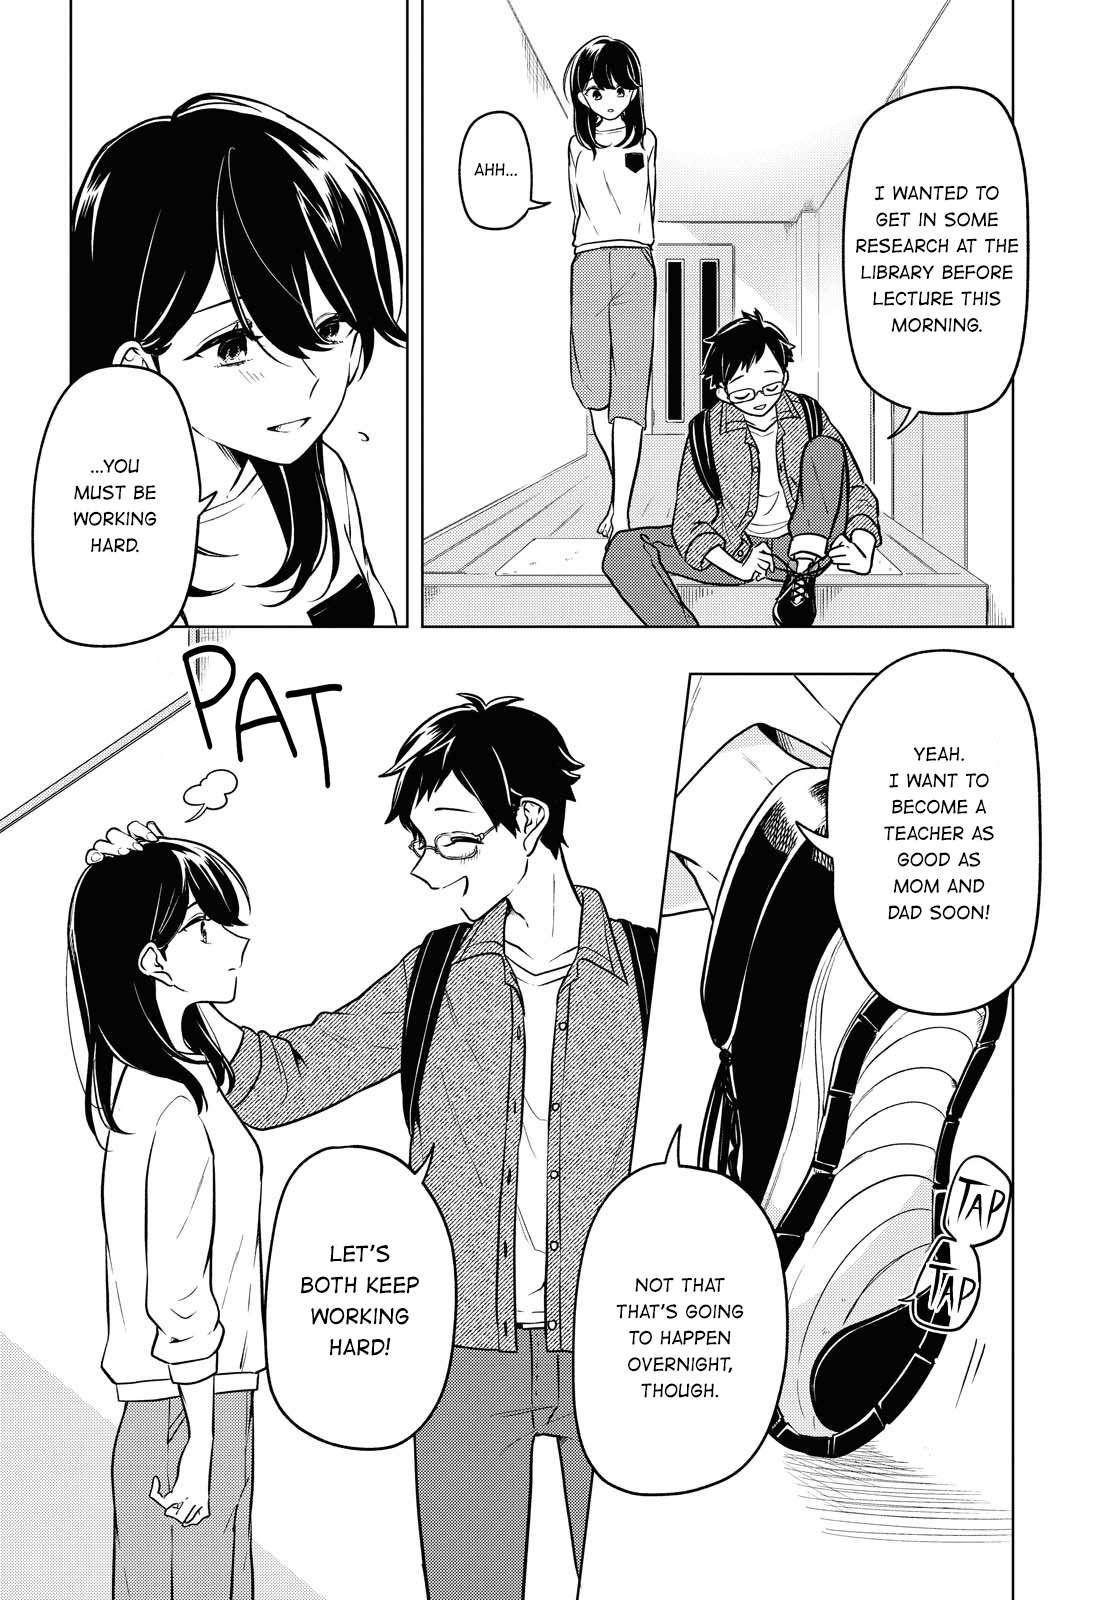 I Can’t Say No to the Lonely Girl - chapter 6 - #4